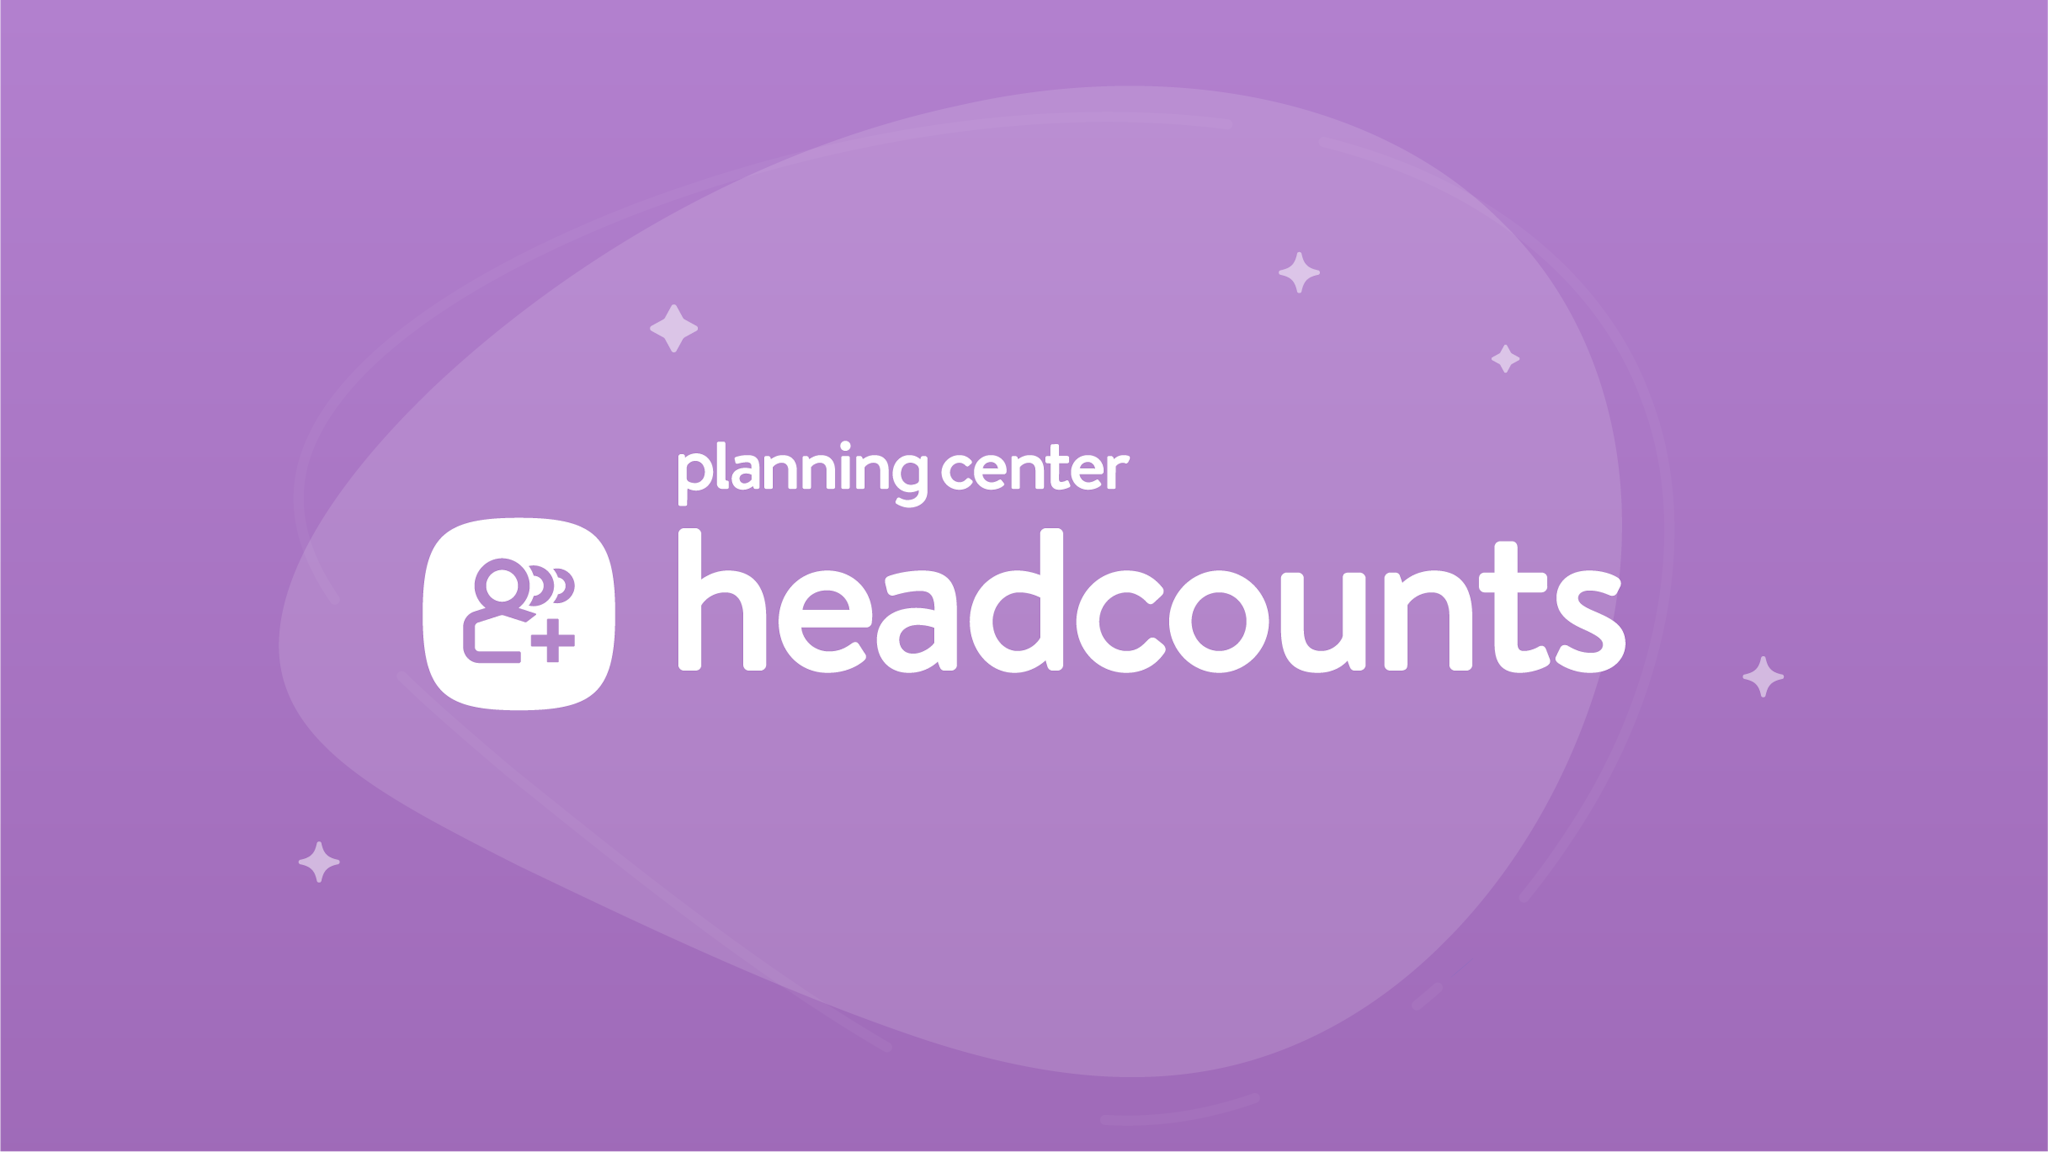 The Planning Center Headcounts typeface in white against a lavender background.